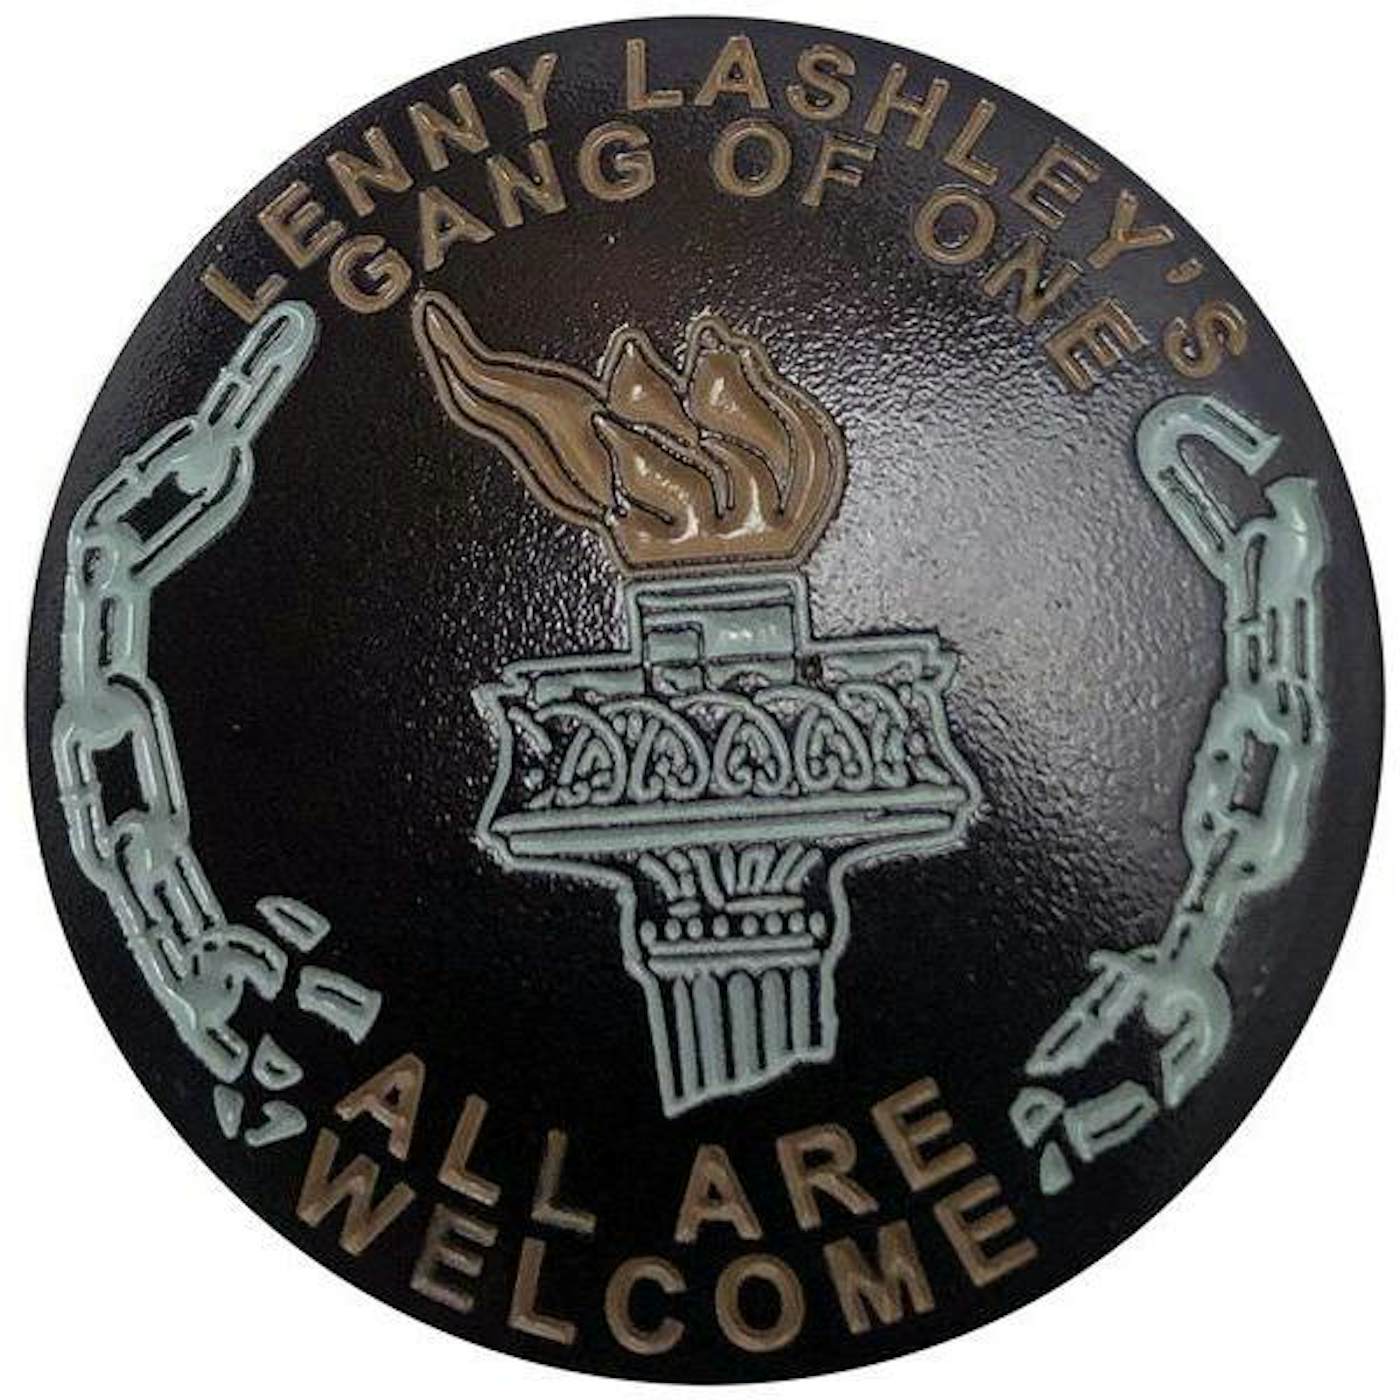 Lenny Lashley's Gang of One Lenny Lashley Gang of One - All Are Welcome - Torch - 1.25" Enamel Pin